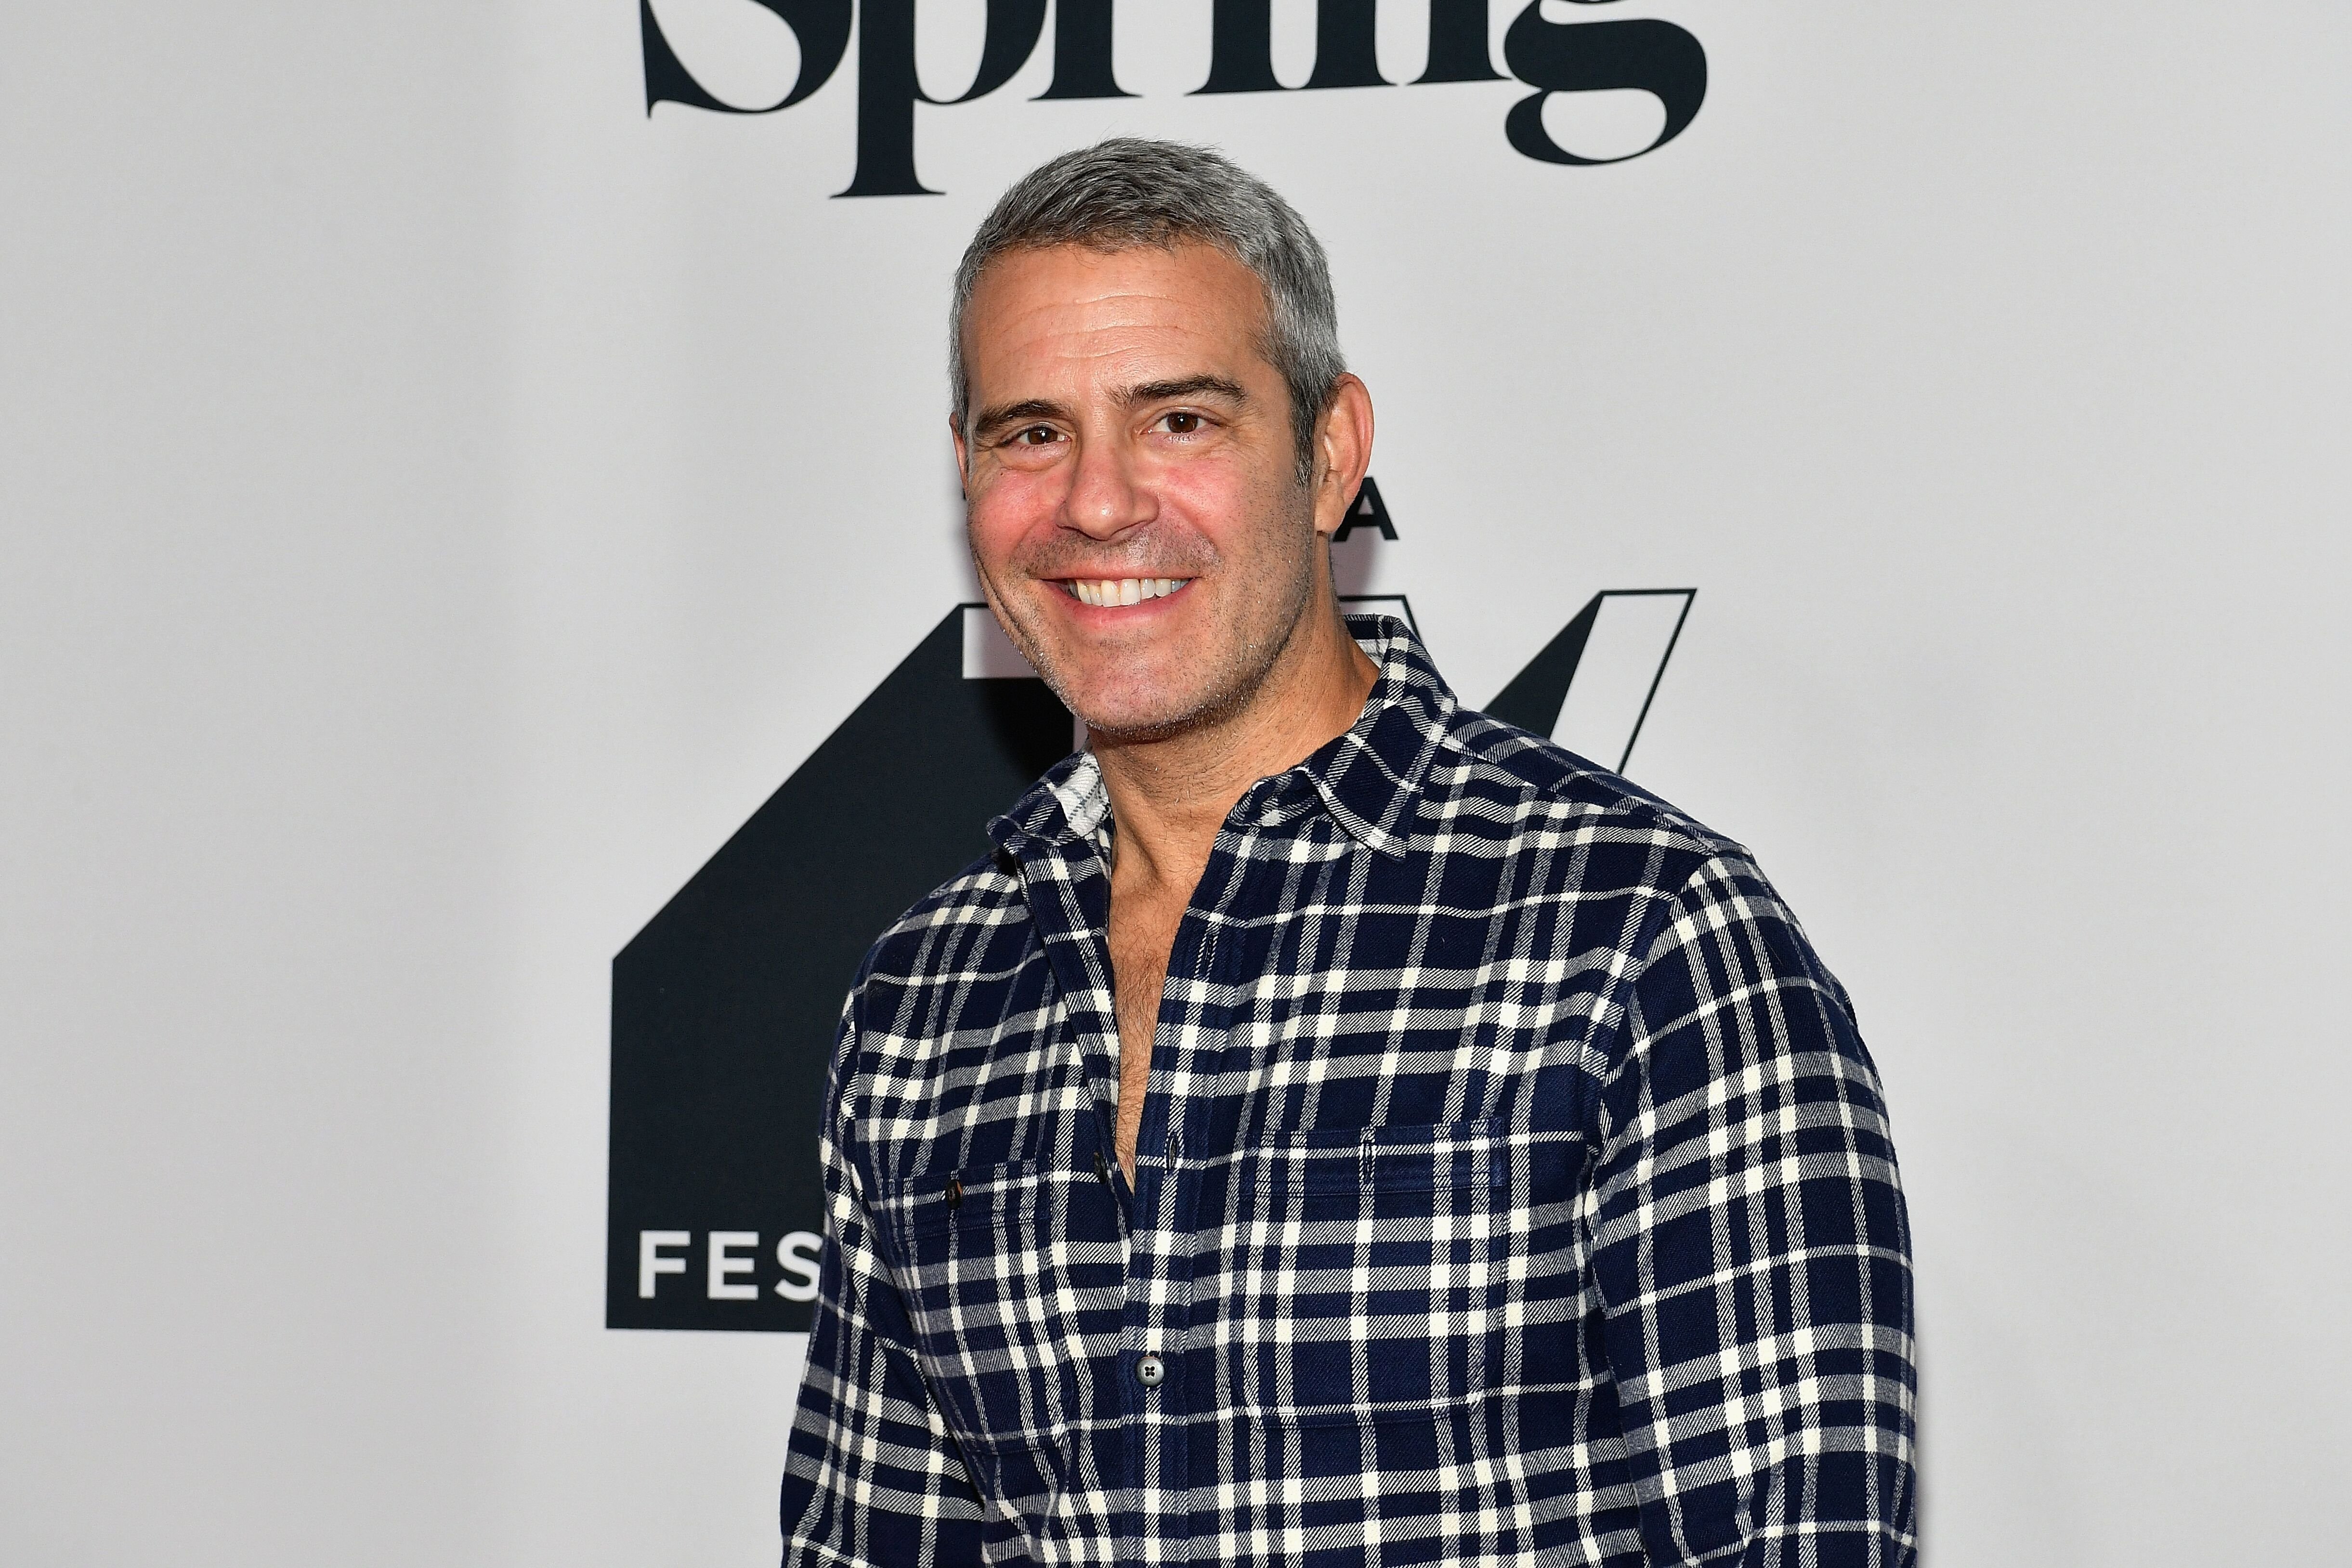 Andy Cohen attends the Tribeca talks panel at Spring Studios on September 23, 2018. | Photo: Getty Images